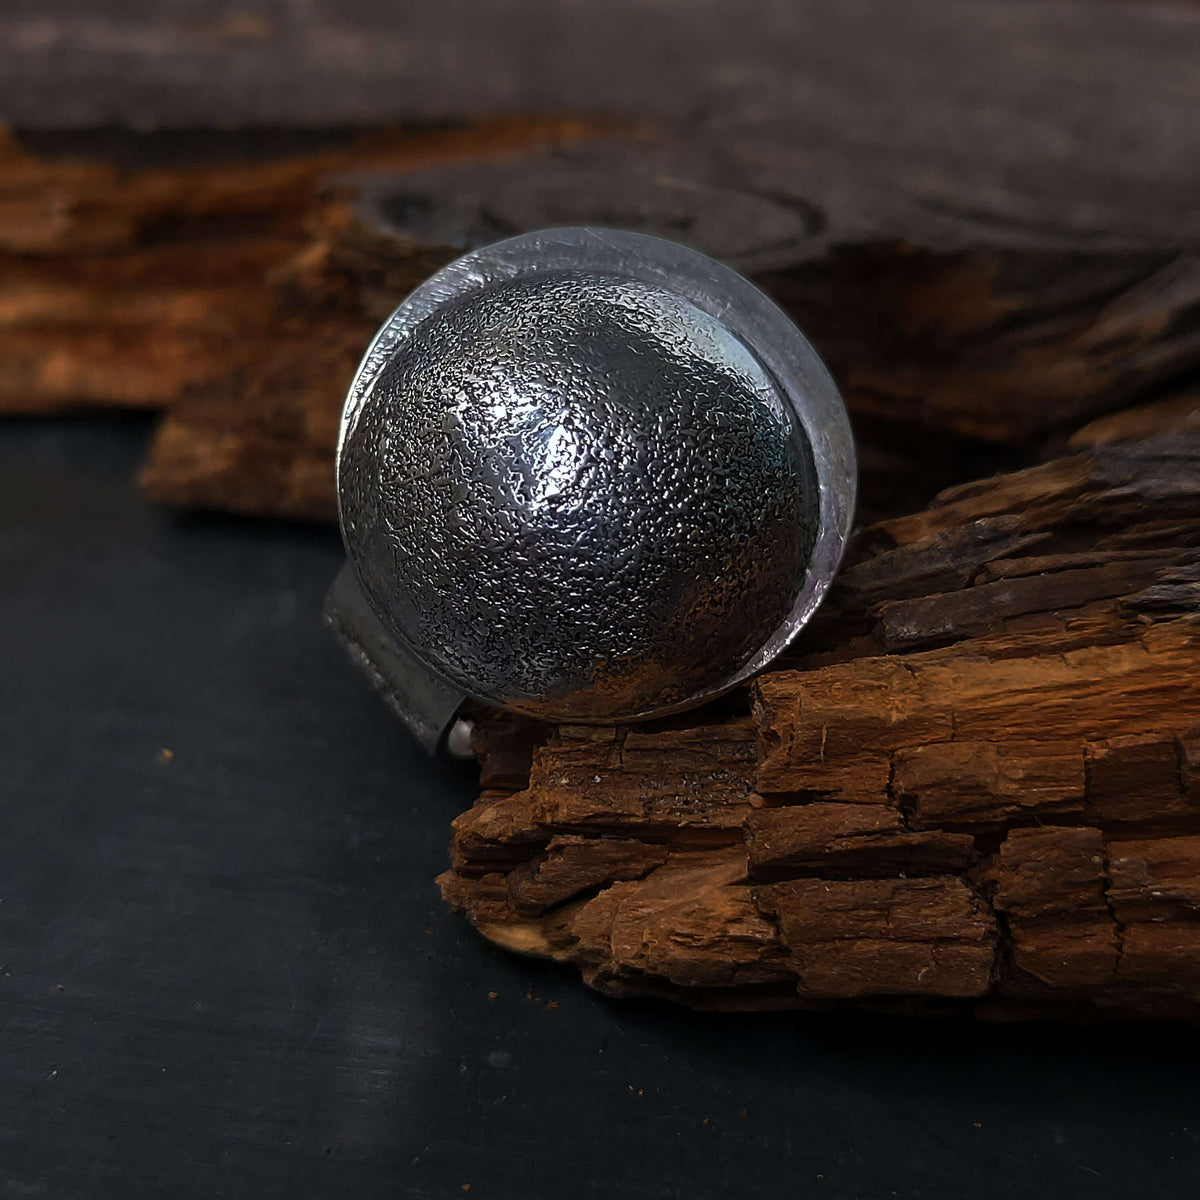 rough texture silver orb ring. moon ring, adjustable, handmade by roff jewellery